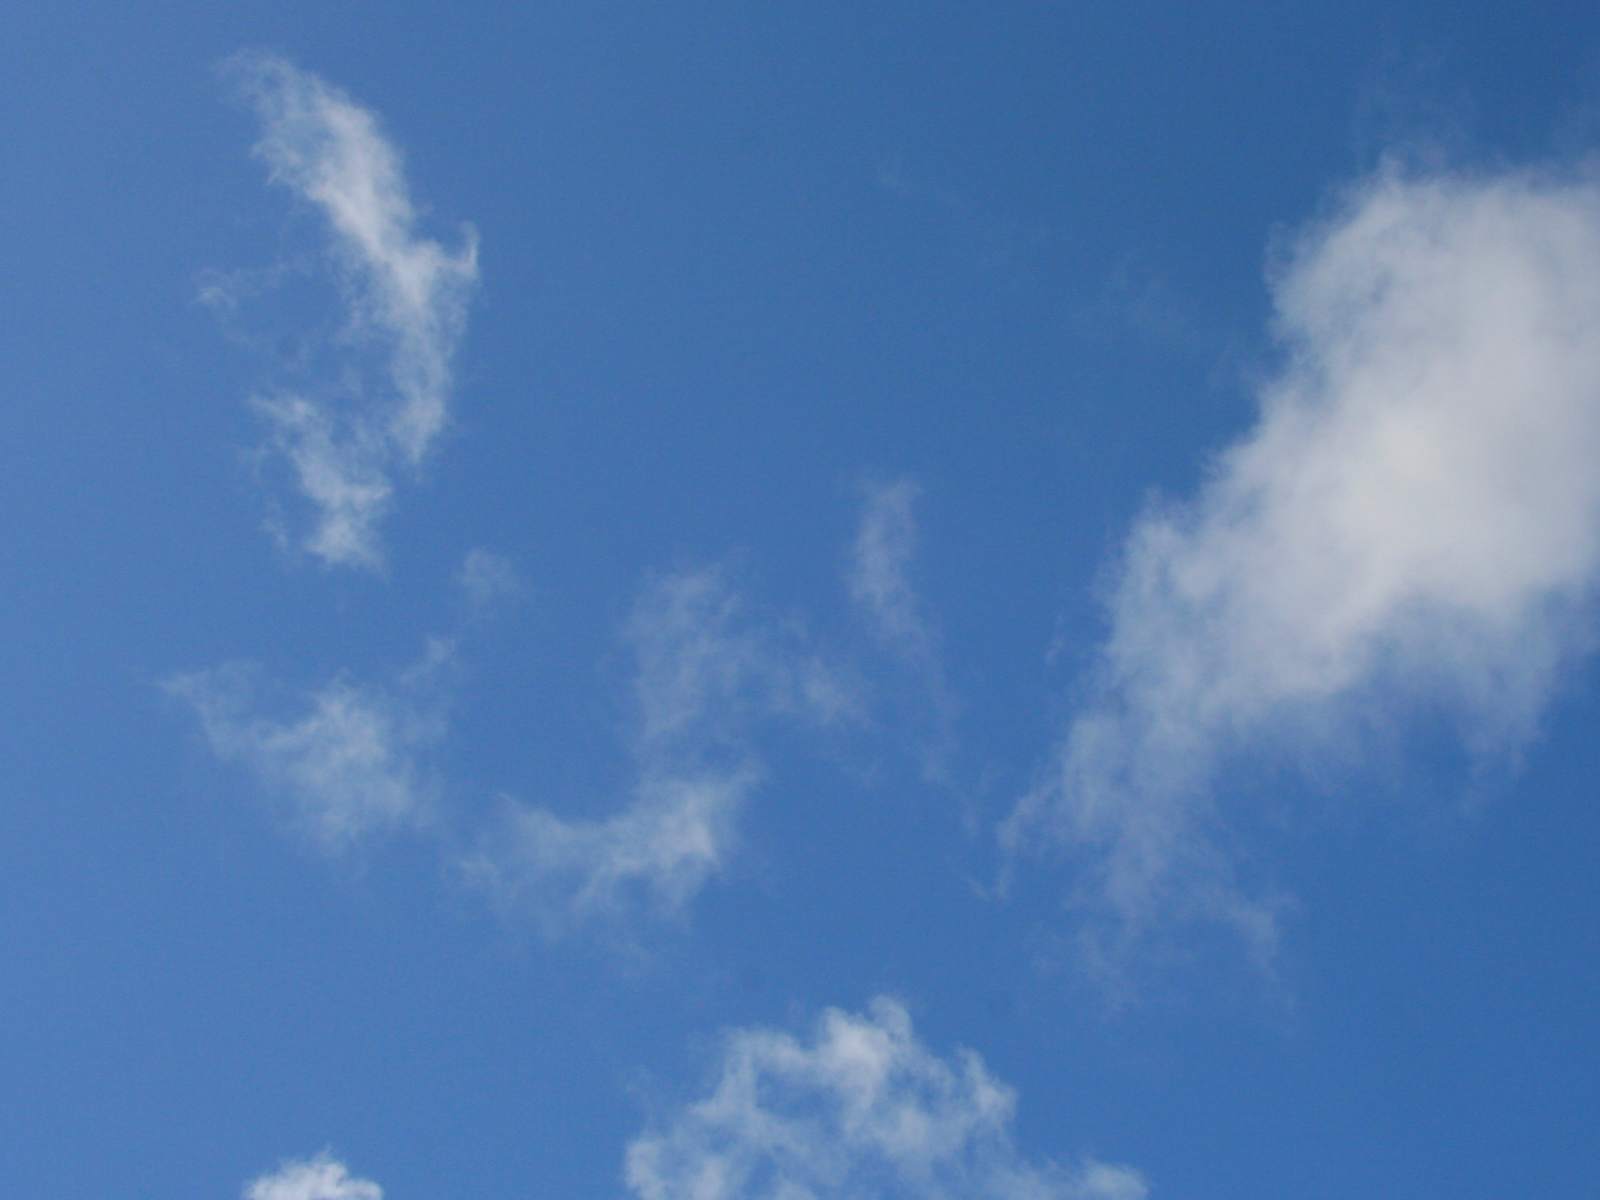 Blue sky, light clouds - clouds for de-stressing and relaxing